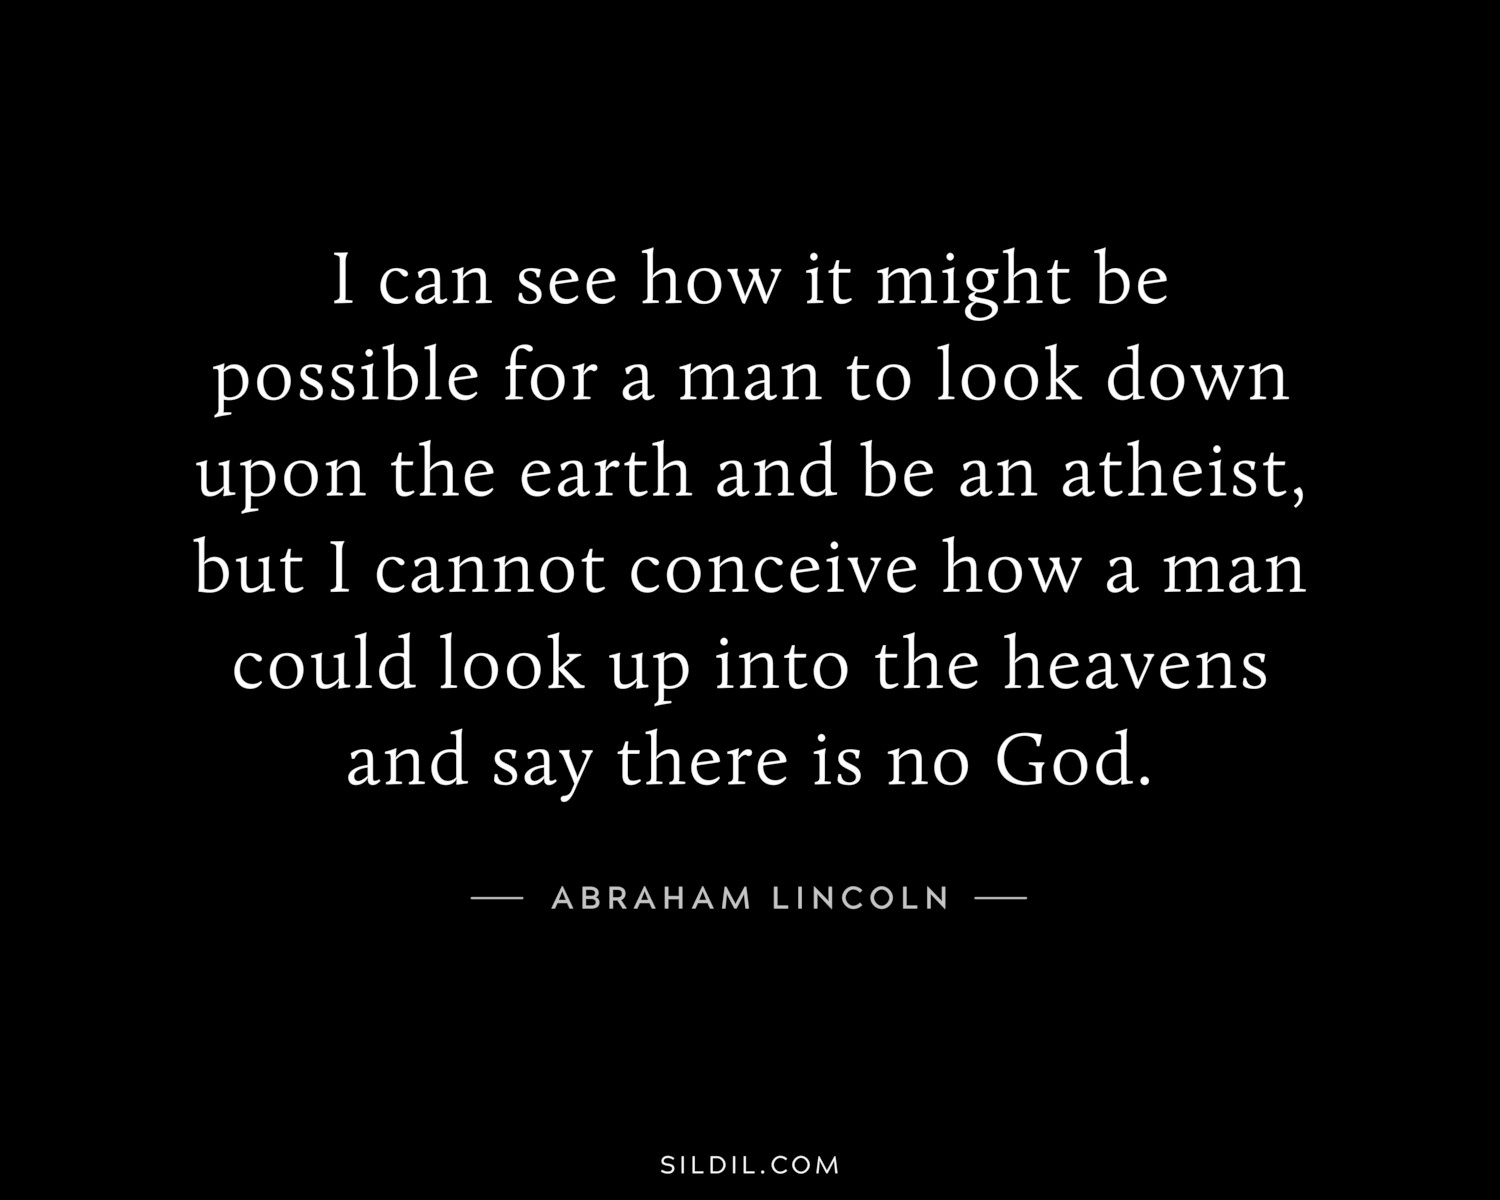 I can see how it might be possible for a man to look down upon the earth and be an atheist, but I cannot conceive how a man could look up into the heavens and say there is no God.